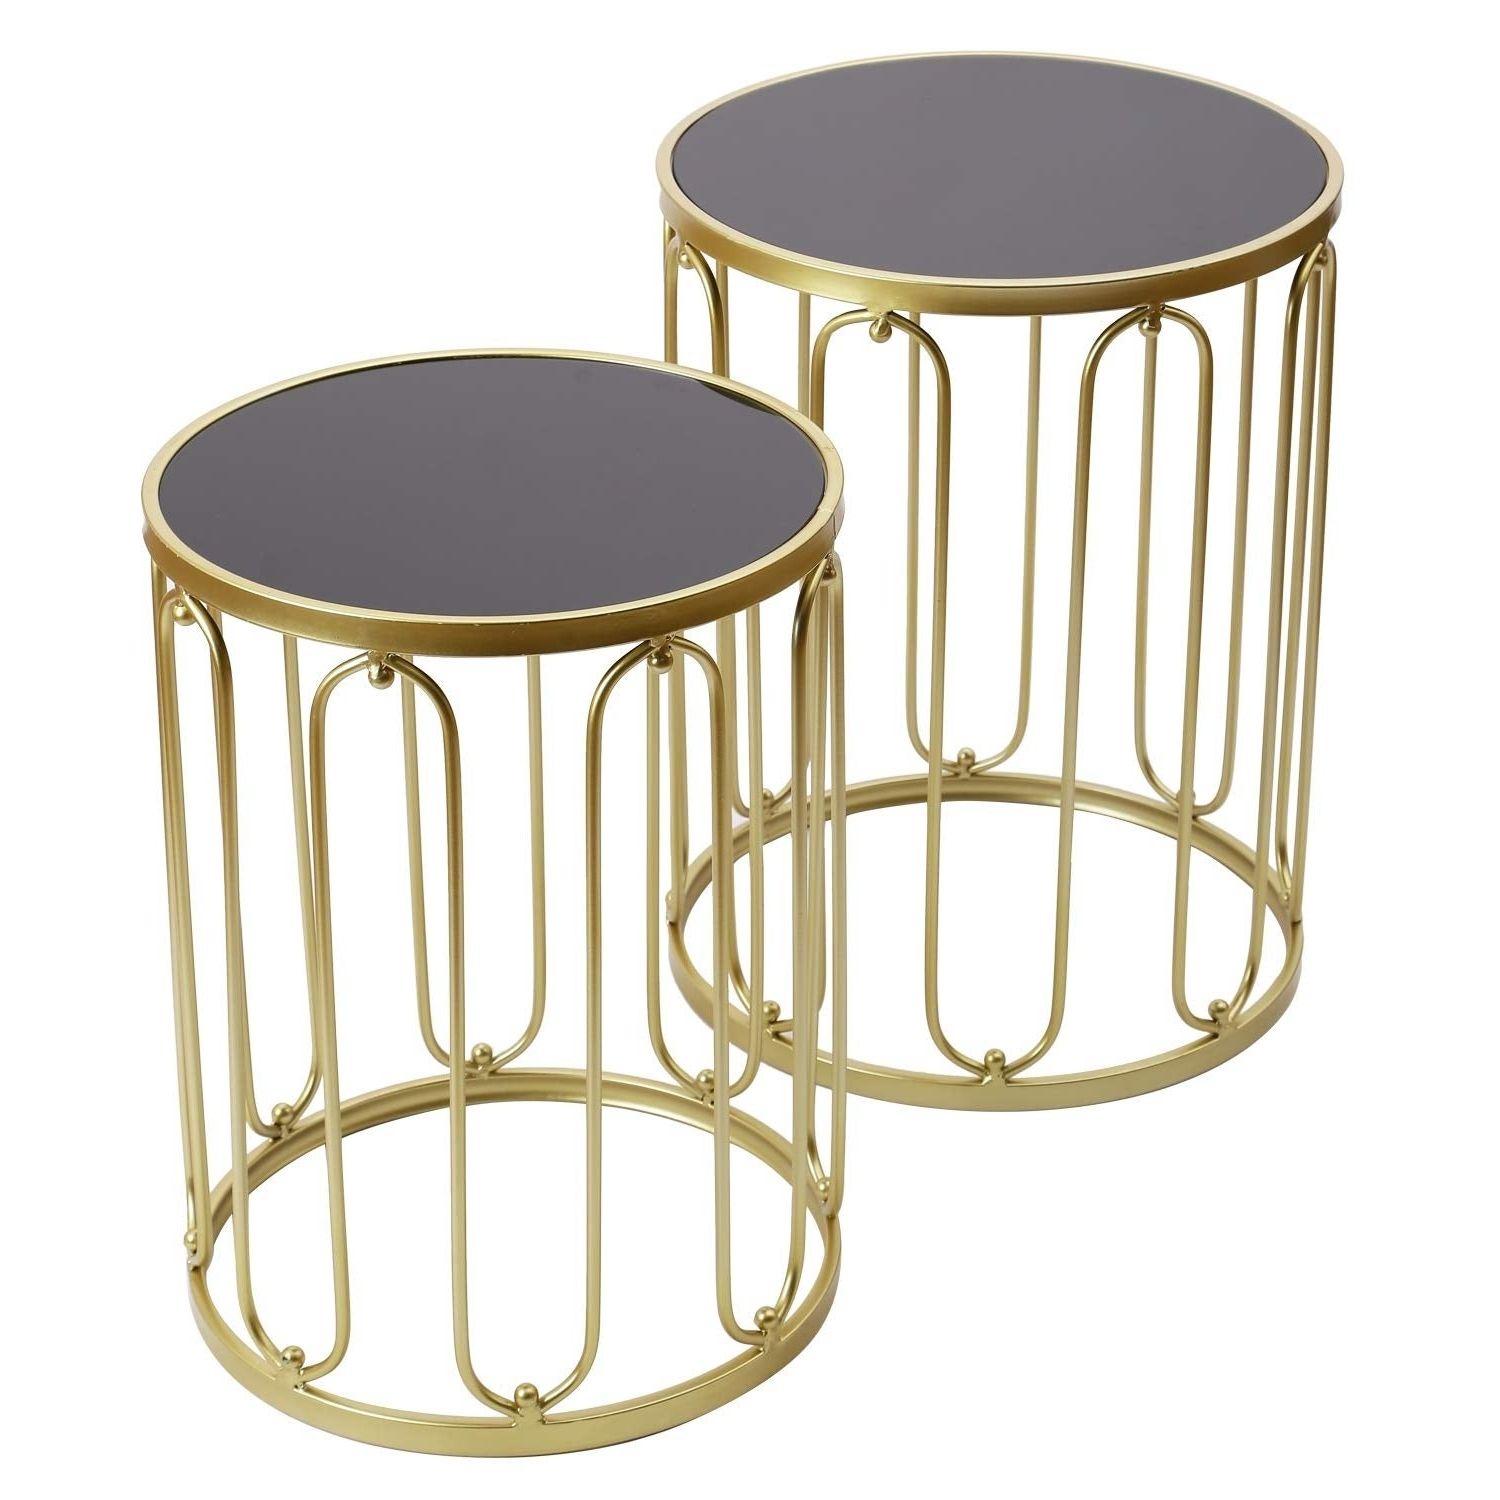 Current Adeco Accent Postmodernism Drum Shape Black Metal Coffee Tables Pertaining To Buy Adeco Coffee, Console, Sofa & End Tables Online At (View 6 of 20)